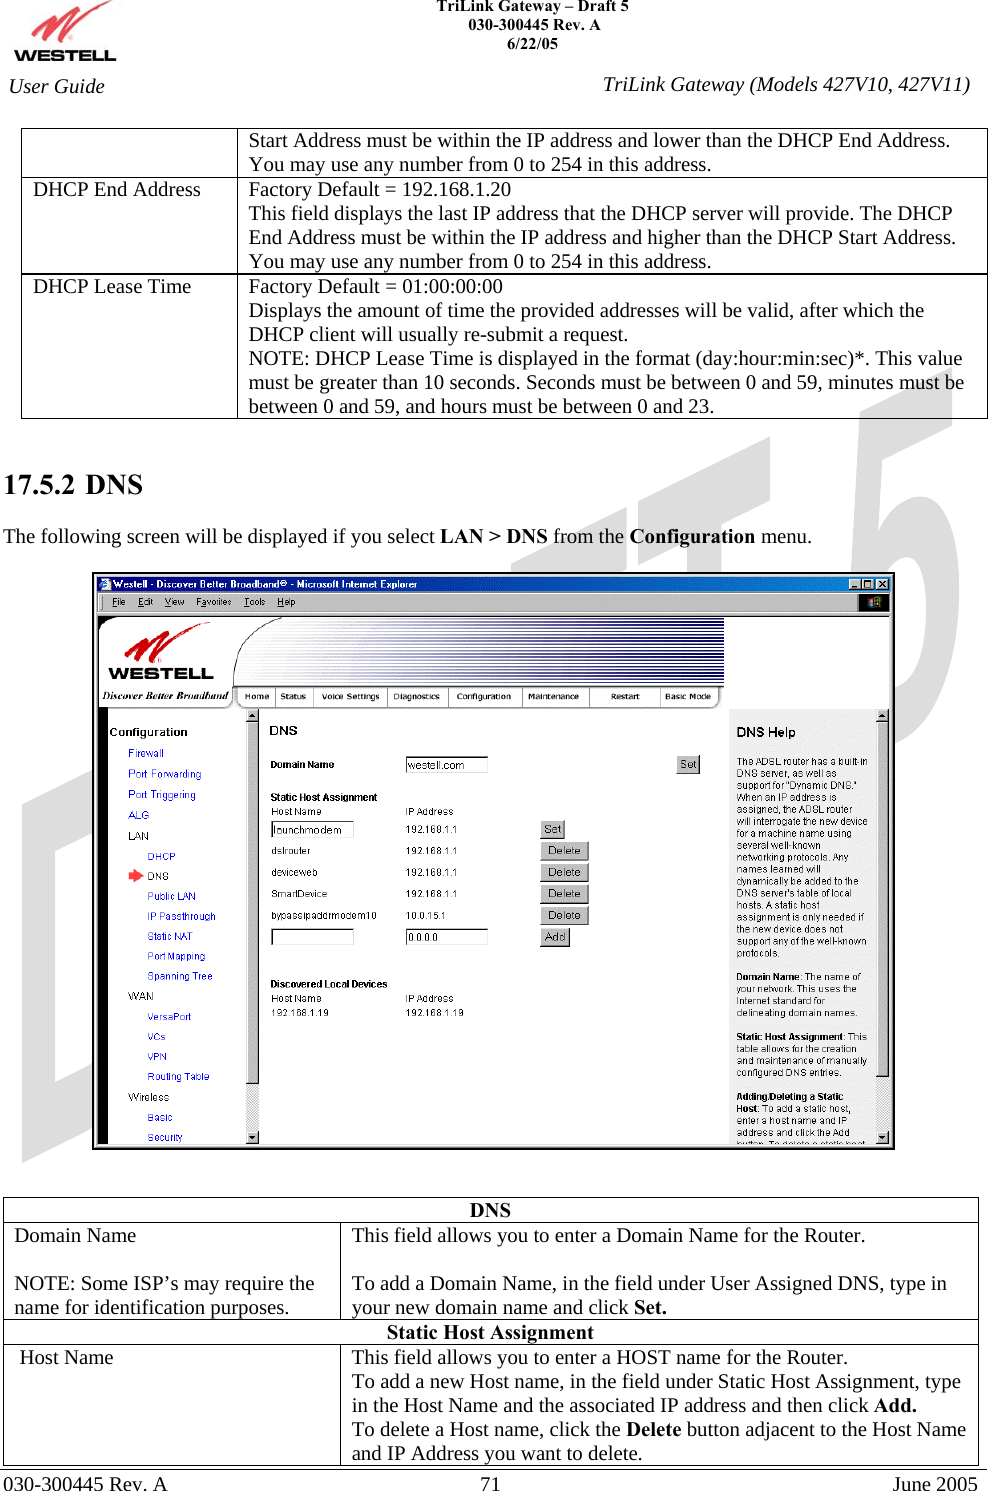    TriLink Gateway – Draft 5   030-300445 Rev. A 6/22/05   030-300445 Rev. A  71  June 2005  User Guide  TriLink Gateway (Models 427V10, 427V11)Start Address must be within the IP address and lower than the DHCP End Address. You may use any number from 0 to 254 in this address. DHCP End Address  Factory Default = 192.168.1.20 This field displays the last IP address that the DHCP server will provide. The DHCP End Address must be within the IP address and higher than the DHCP Start Address. You may use any number from 0 to 254 in this address. DHCP Lease Time  Factory Default = 01:00:00:00  Displays the amount of time the provided addresses will be valid, after which the DHCP client will usually re-submit a request. NOTE: DHCP Lease Time is displayed in the format (day:hour:min:sec)*. This value must be greater than 10 seconds. Seconds must be between 0 and 59, minutes must be between 0 and 59, and hours must be between 0 and 23.     17.5.2   DNS  The following screen will be displayed if you select LAN &gt; DNS from the Configuration menu.      DNS Domain Name  NOTE: Some ISP’s may require the name for identification purposes. This field allows you to enter a Domain Name for the Router.  To add a Domain Name, in the field under User Assigned DNS, type in your new domain name and click Set. Static Host Assignment  Host Name  This field allows you to enter a HOST name for the Router. To add a new Host name, in the field under Static Host Assignment, type in the Host Name and the associated IP address and then click Add. To delete a Host name, click the Delete button adjacent to the Host Name and IP Address you want to delete.  